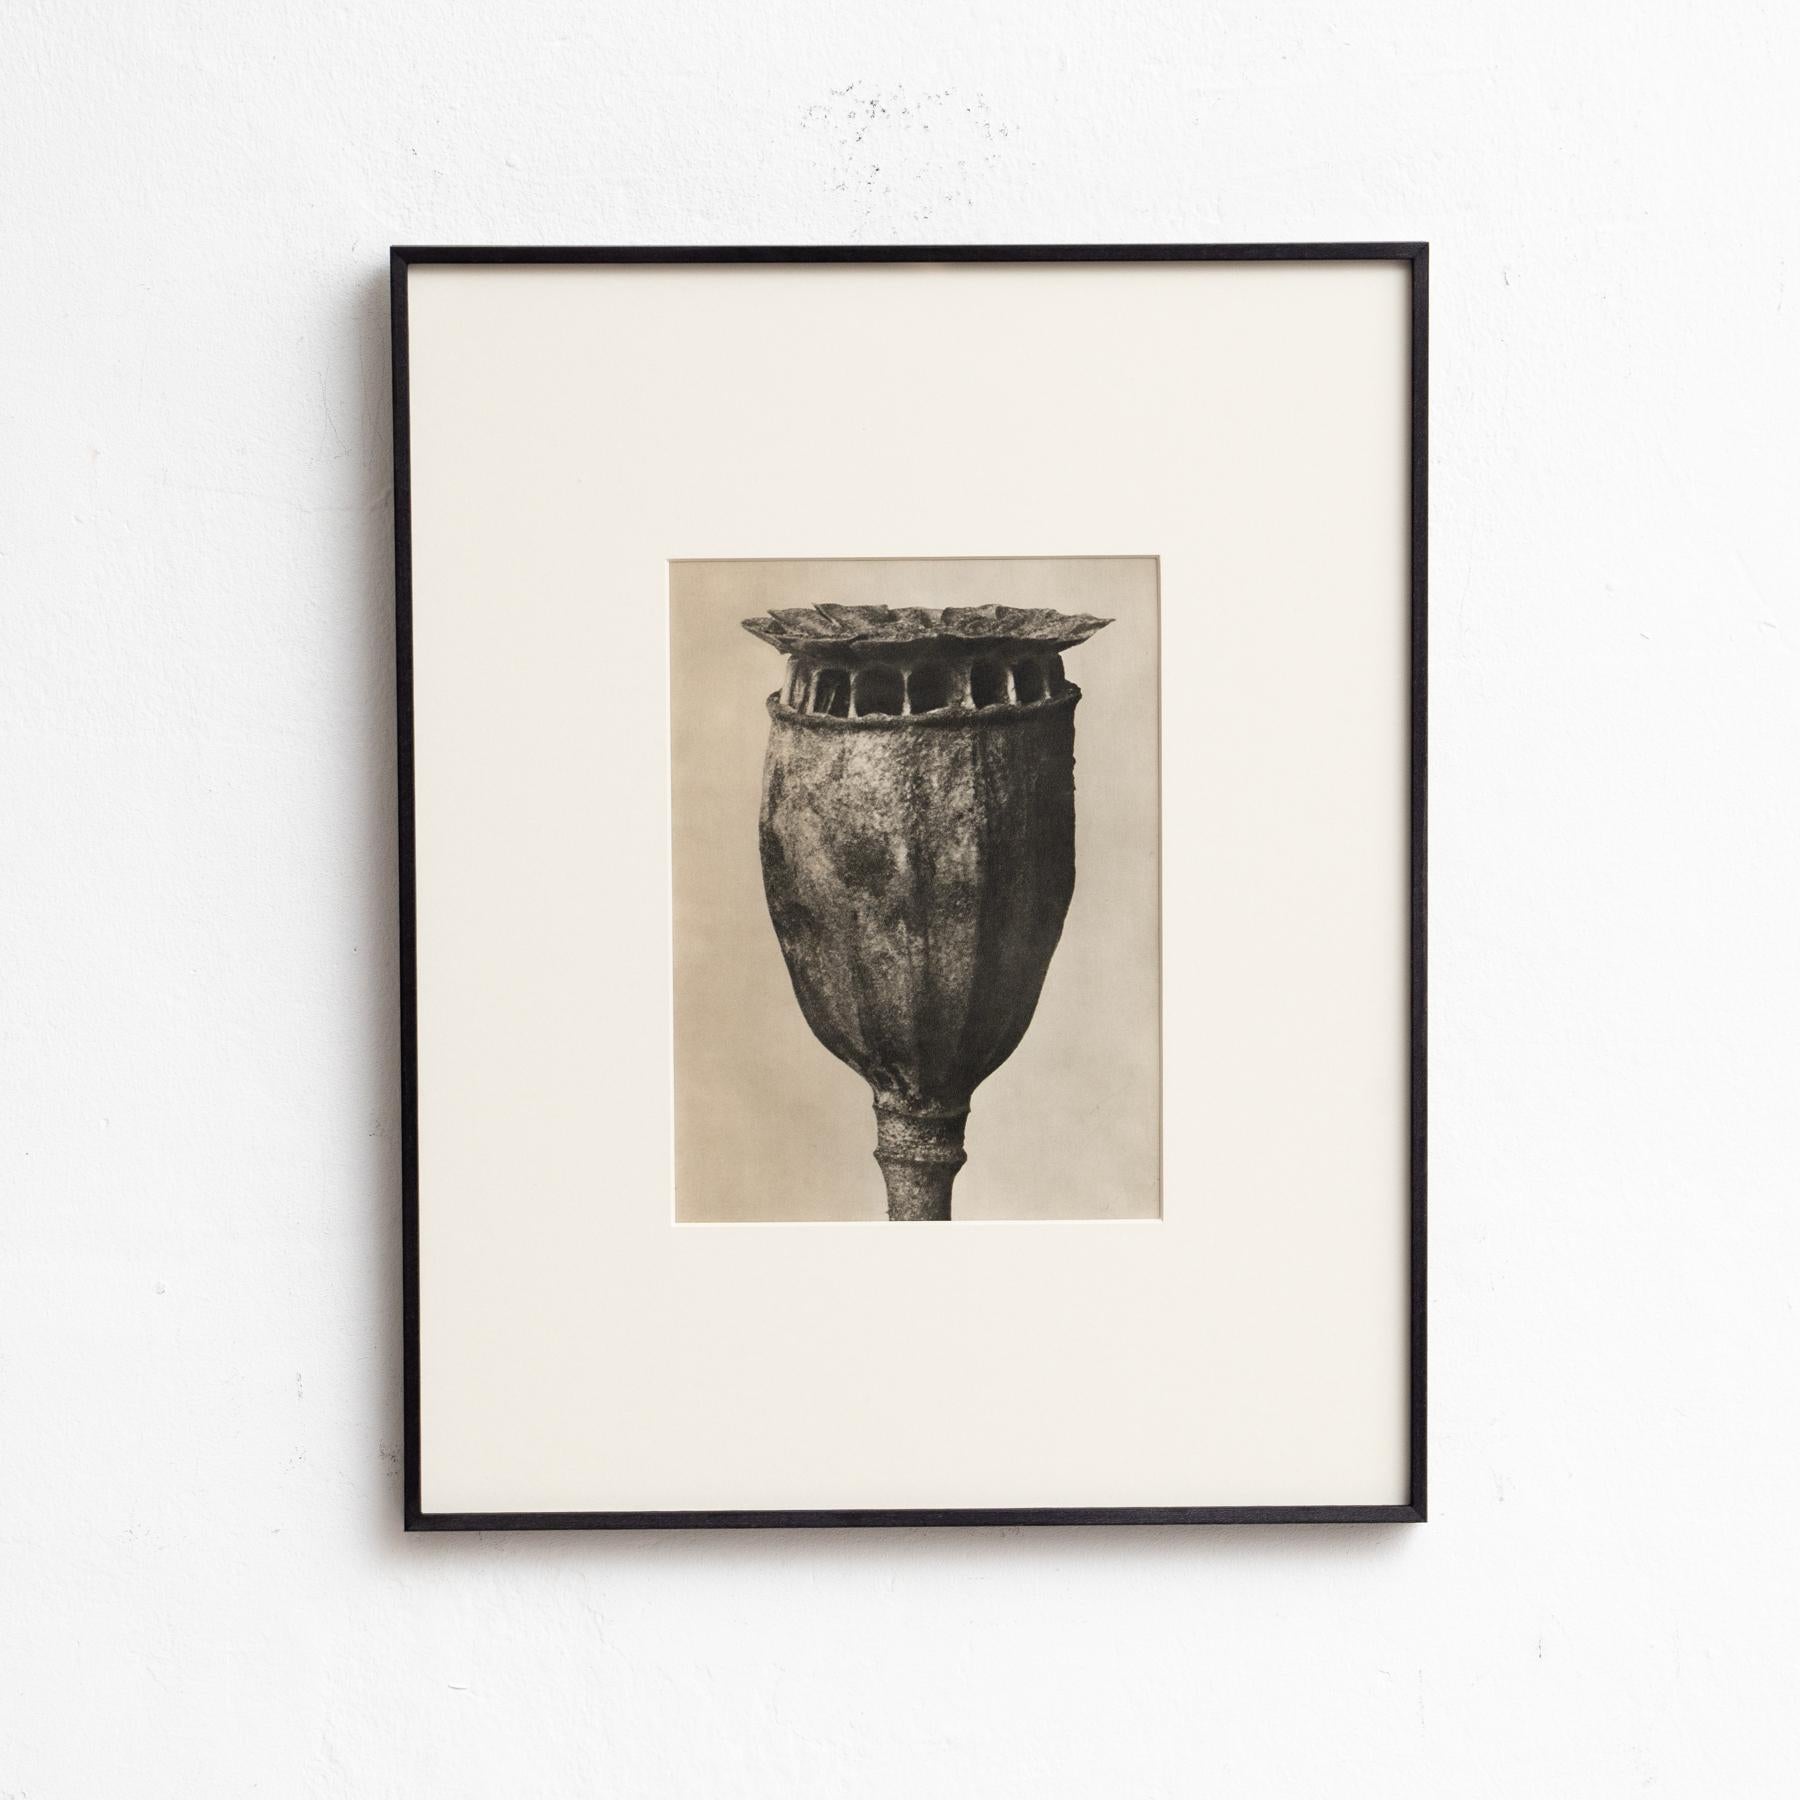 Presenting a captivating Karl Blossfeldt Photogravure from the 1942 edition of the book 'Wunder in der Natur.' 

In its original condition, this piece boasts minor wear that beautifully weaves into its historical narrative, showcasing a lovely